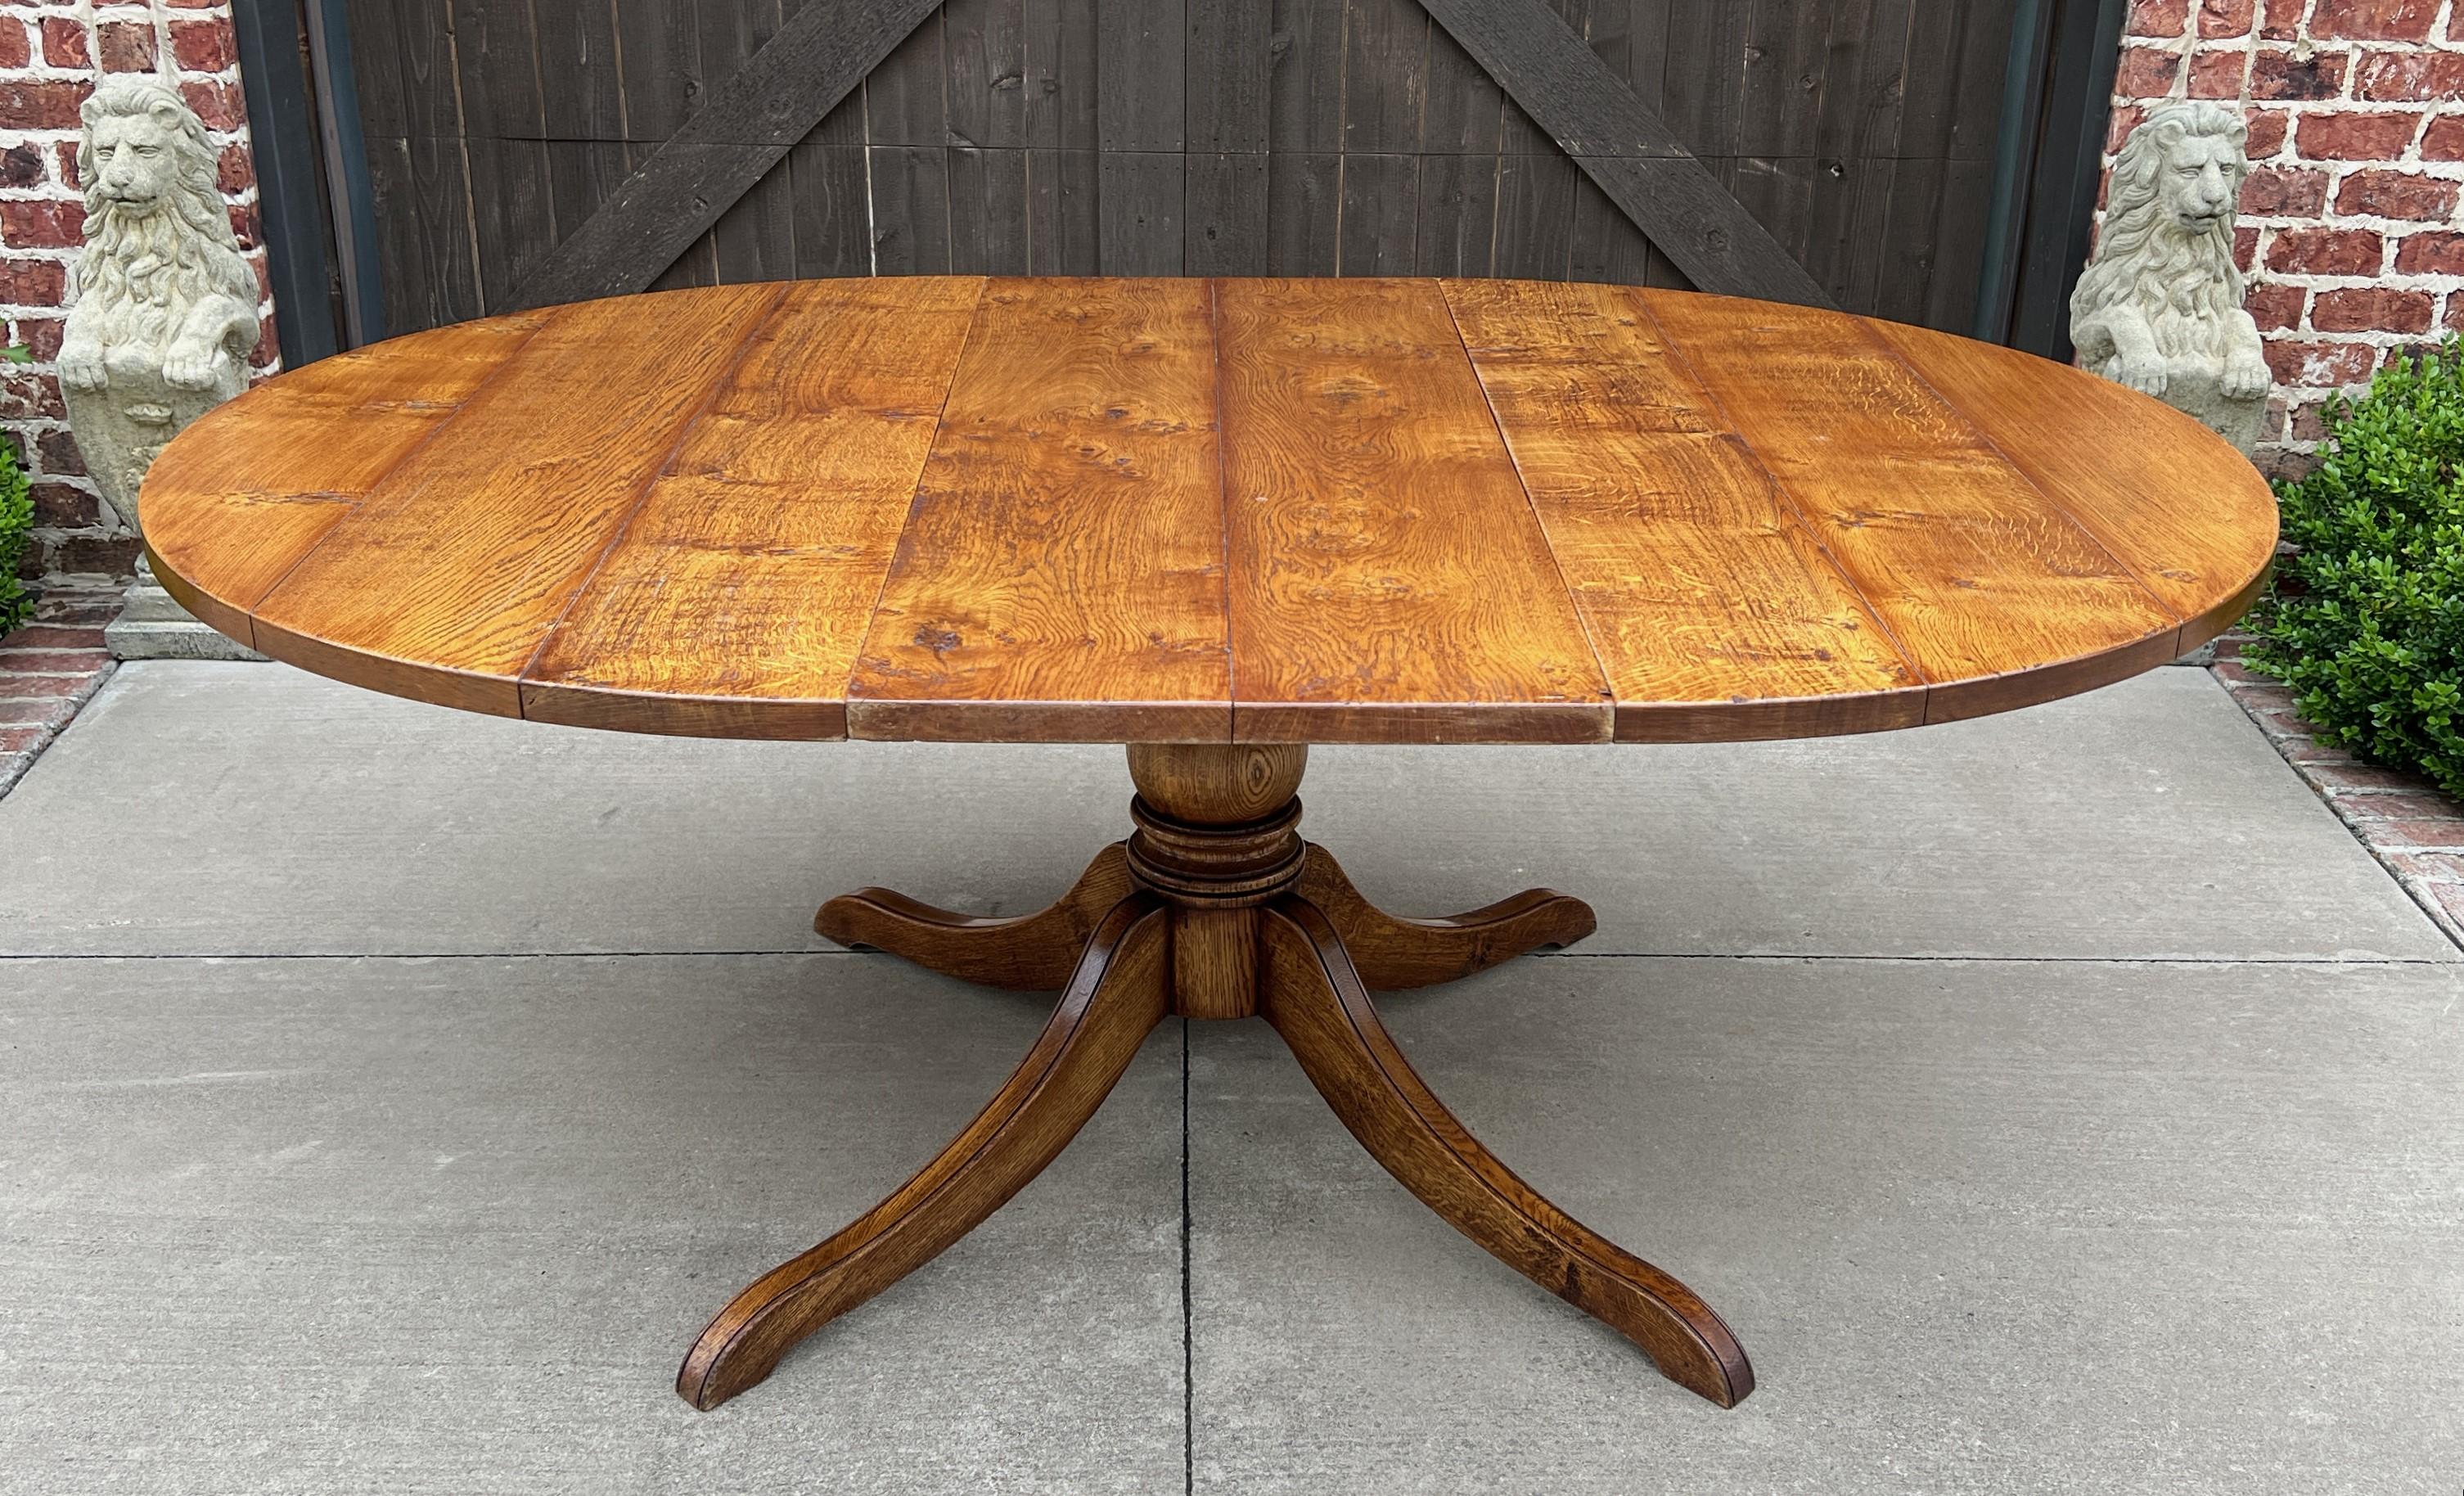 Midcentury English Round/Oval Dining Table Pedestal Base with Leaf Oak, c. 1940s 1